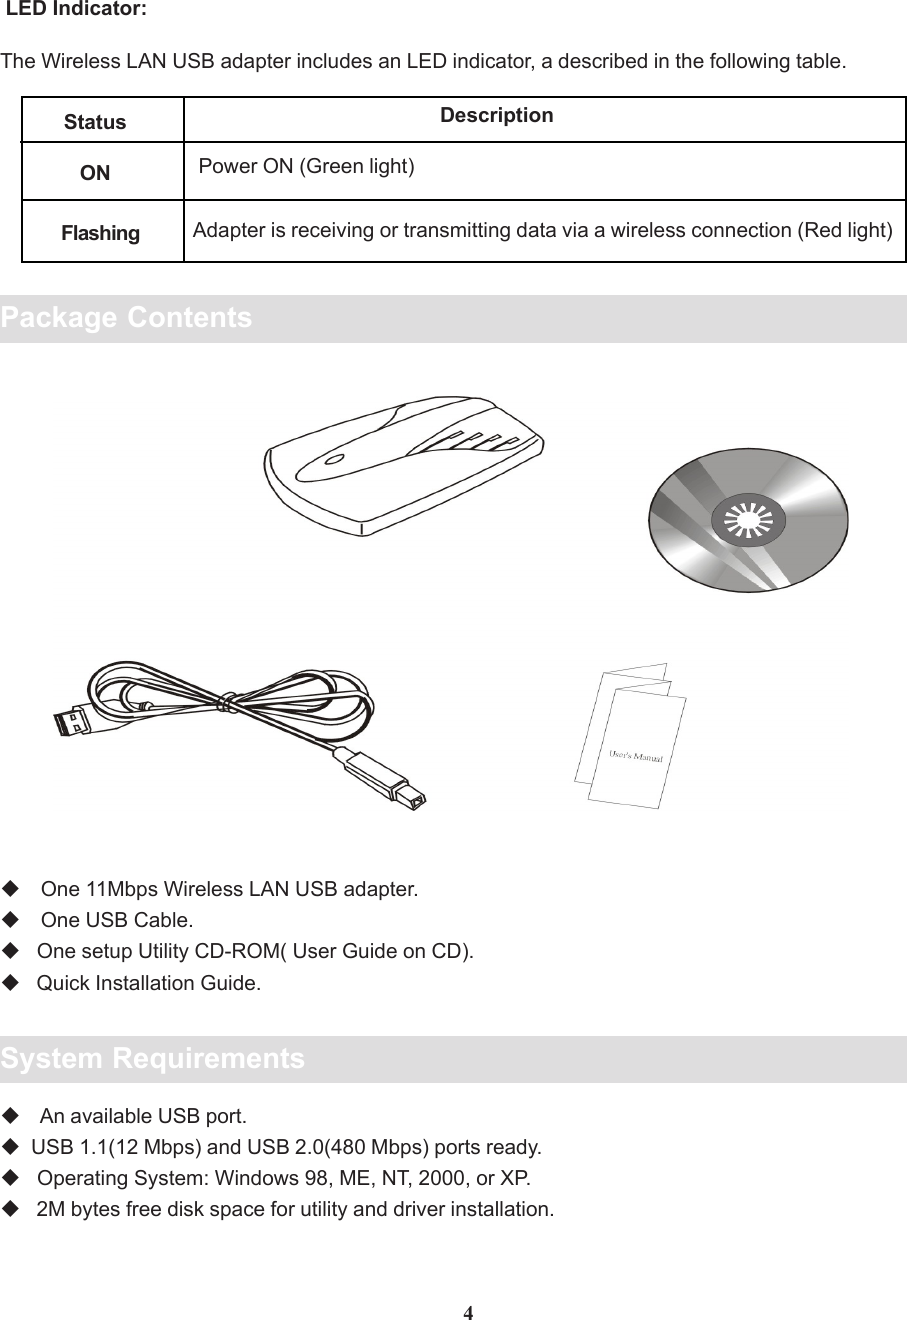 Package Contents One 11Mbps Wireless LAN USB adapter. One USB Cable.   One setup Utility CD-ROM( User Guide on CD).   Quick Installation Guide.System Requirements An available USB port.  USB 1.1(12 Mbps) and USB 2.0(480 Mbps) ports ready.   Operating System: Windows 98, ME, NT, 2000, or XP.   2M bytes free disk space for utility and driver installation.4 LED Indicator:The Wireless LAN USB adapter includes an LED indicator, a described in the following table.Status DescriptionONFlashingPower ON (Green light)Adapter is receiving or transmitting data via a wireless connection (Red light)